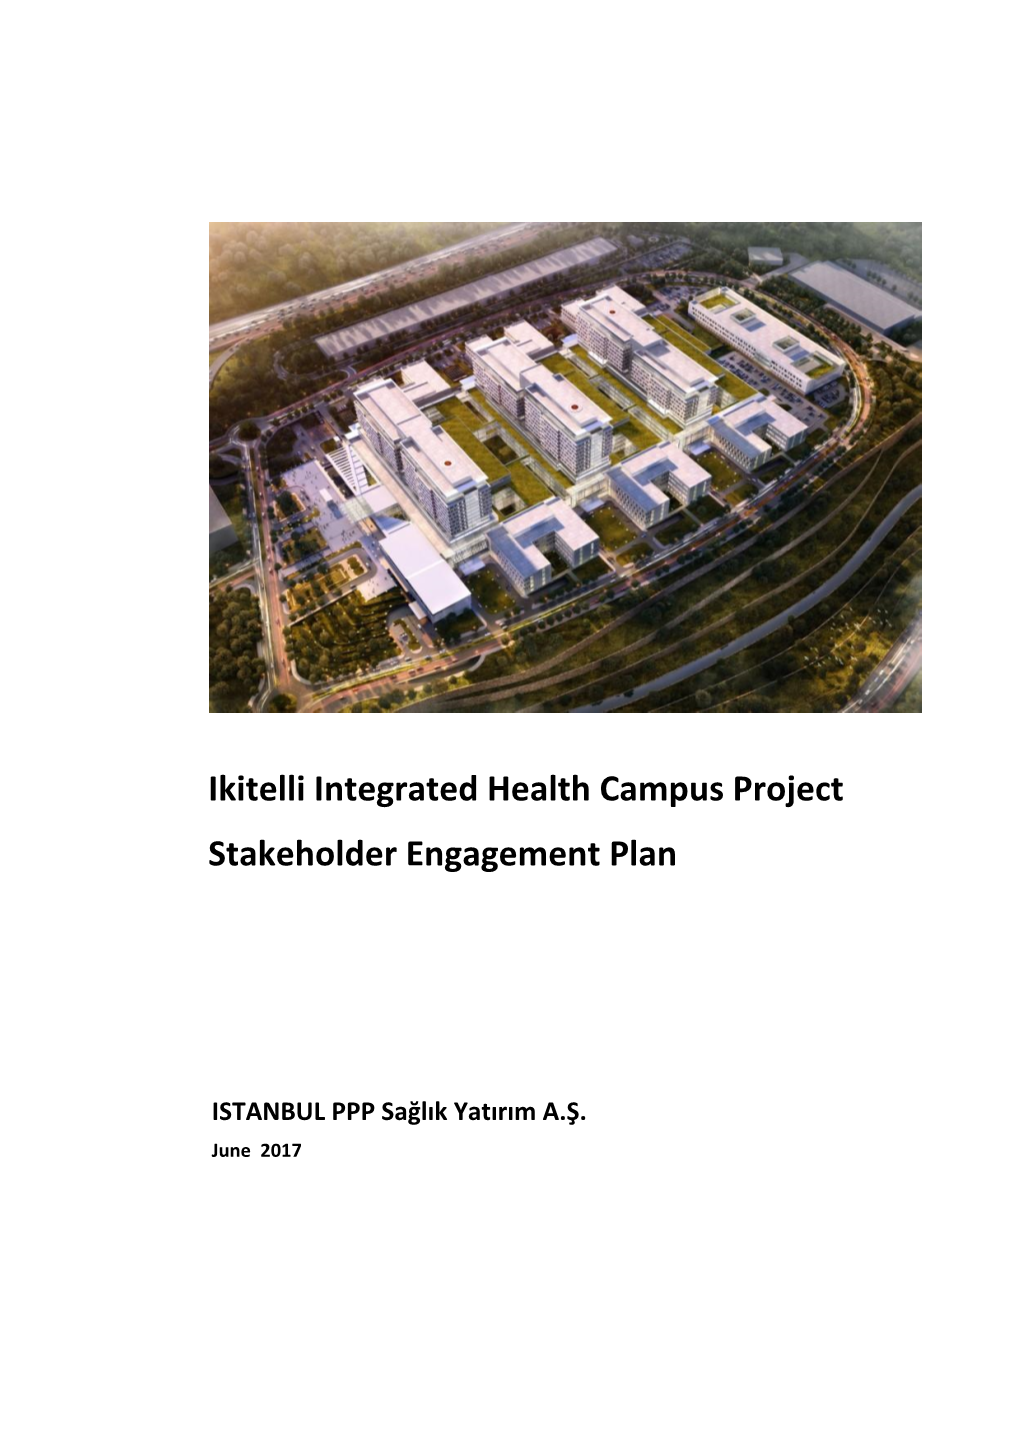 Ikitelli Integrated Health Campus Project Stakeholder Engagement Plan 1 June 2017